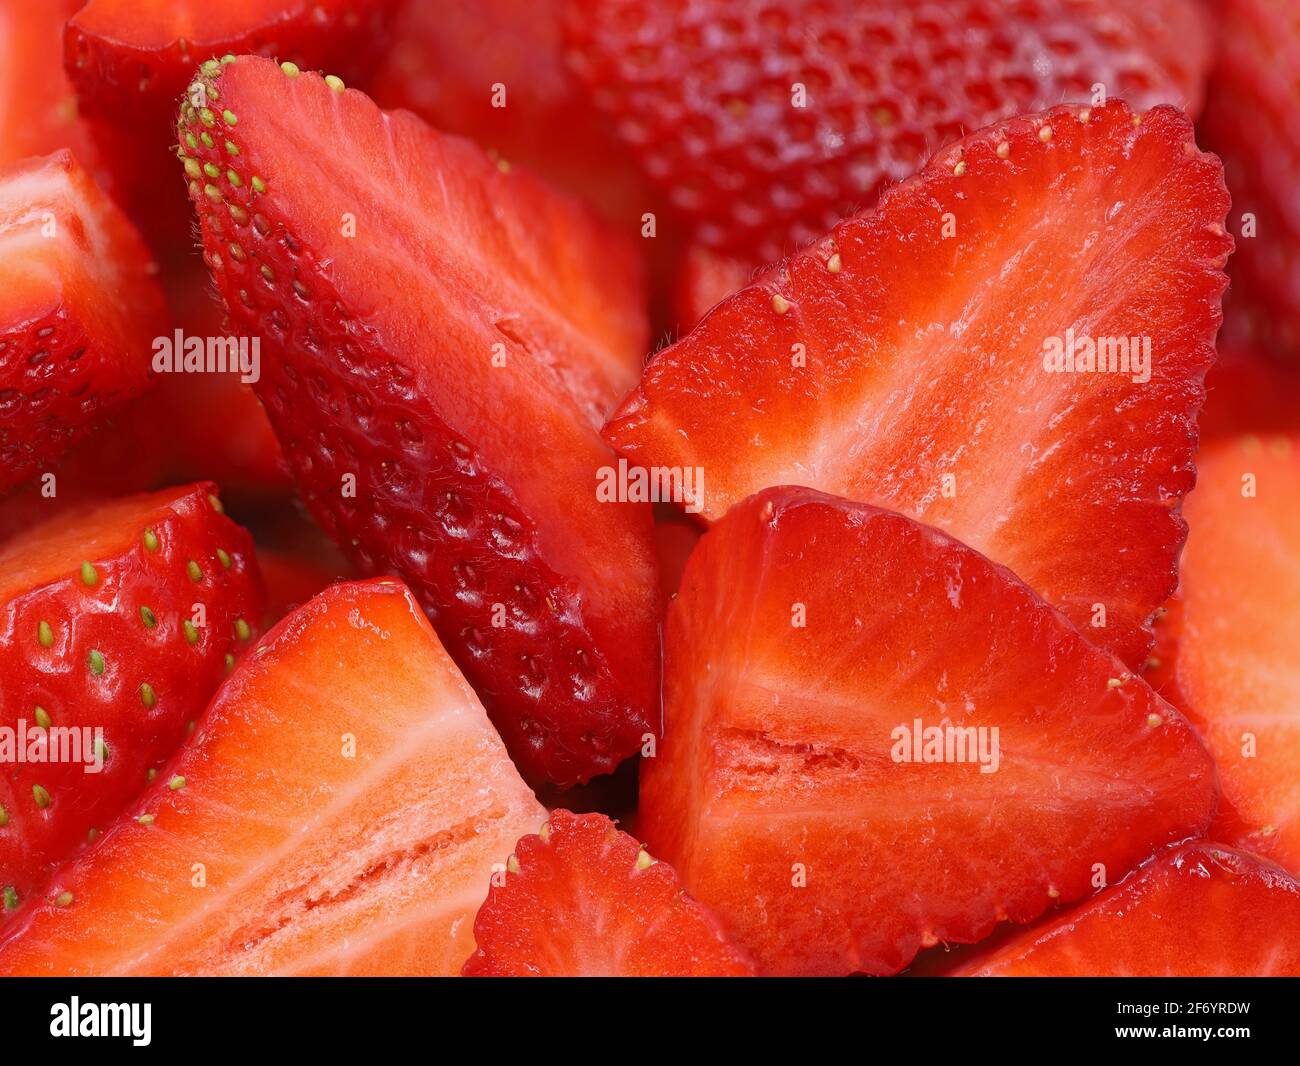 close up of sliced ripe red strawberries, superfood background Stock Photo